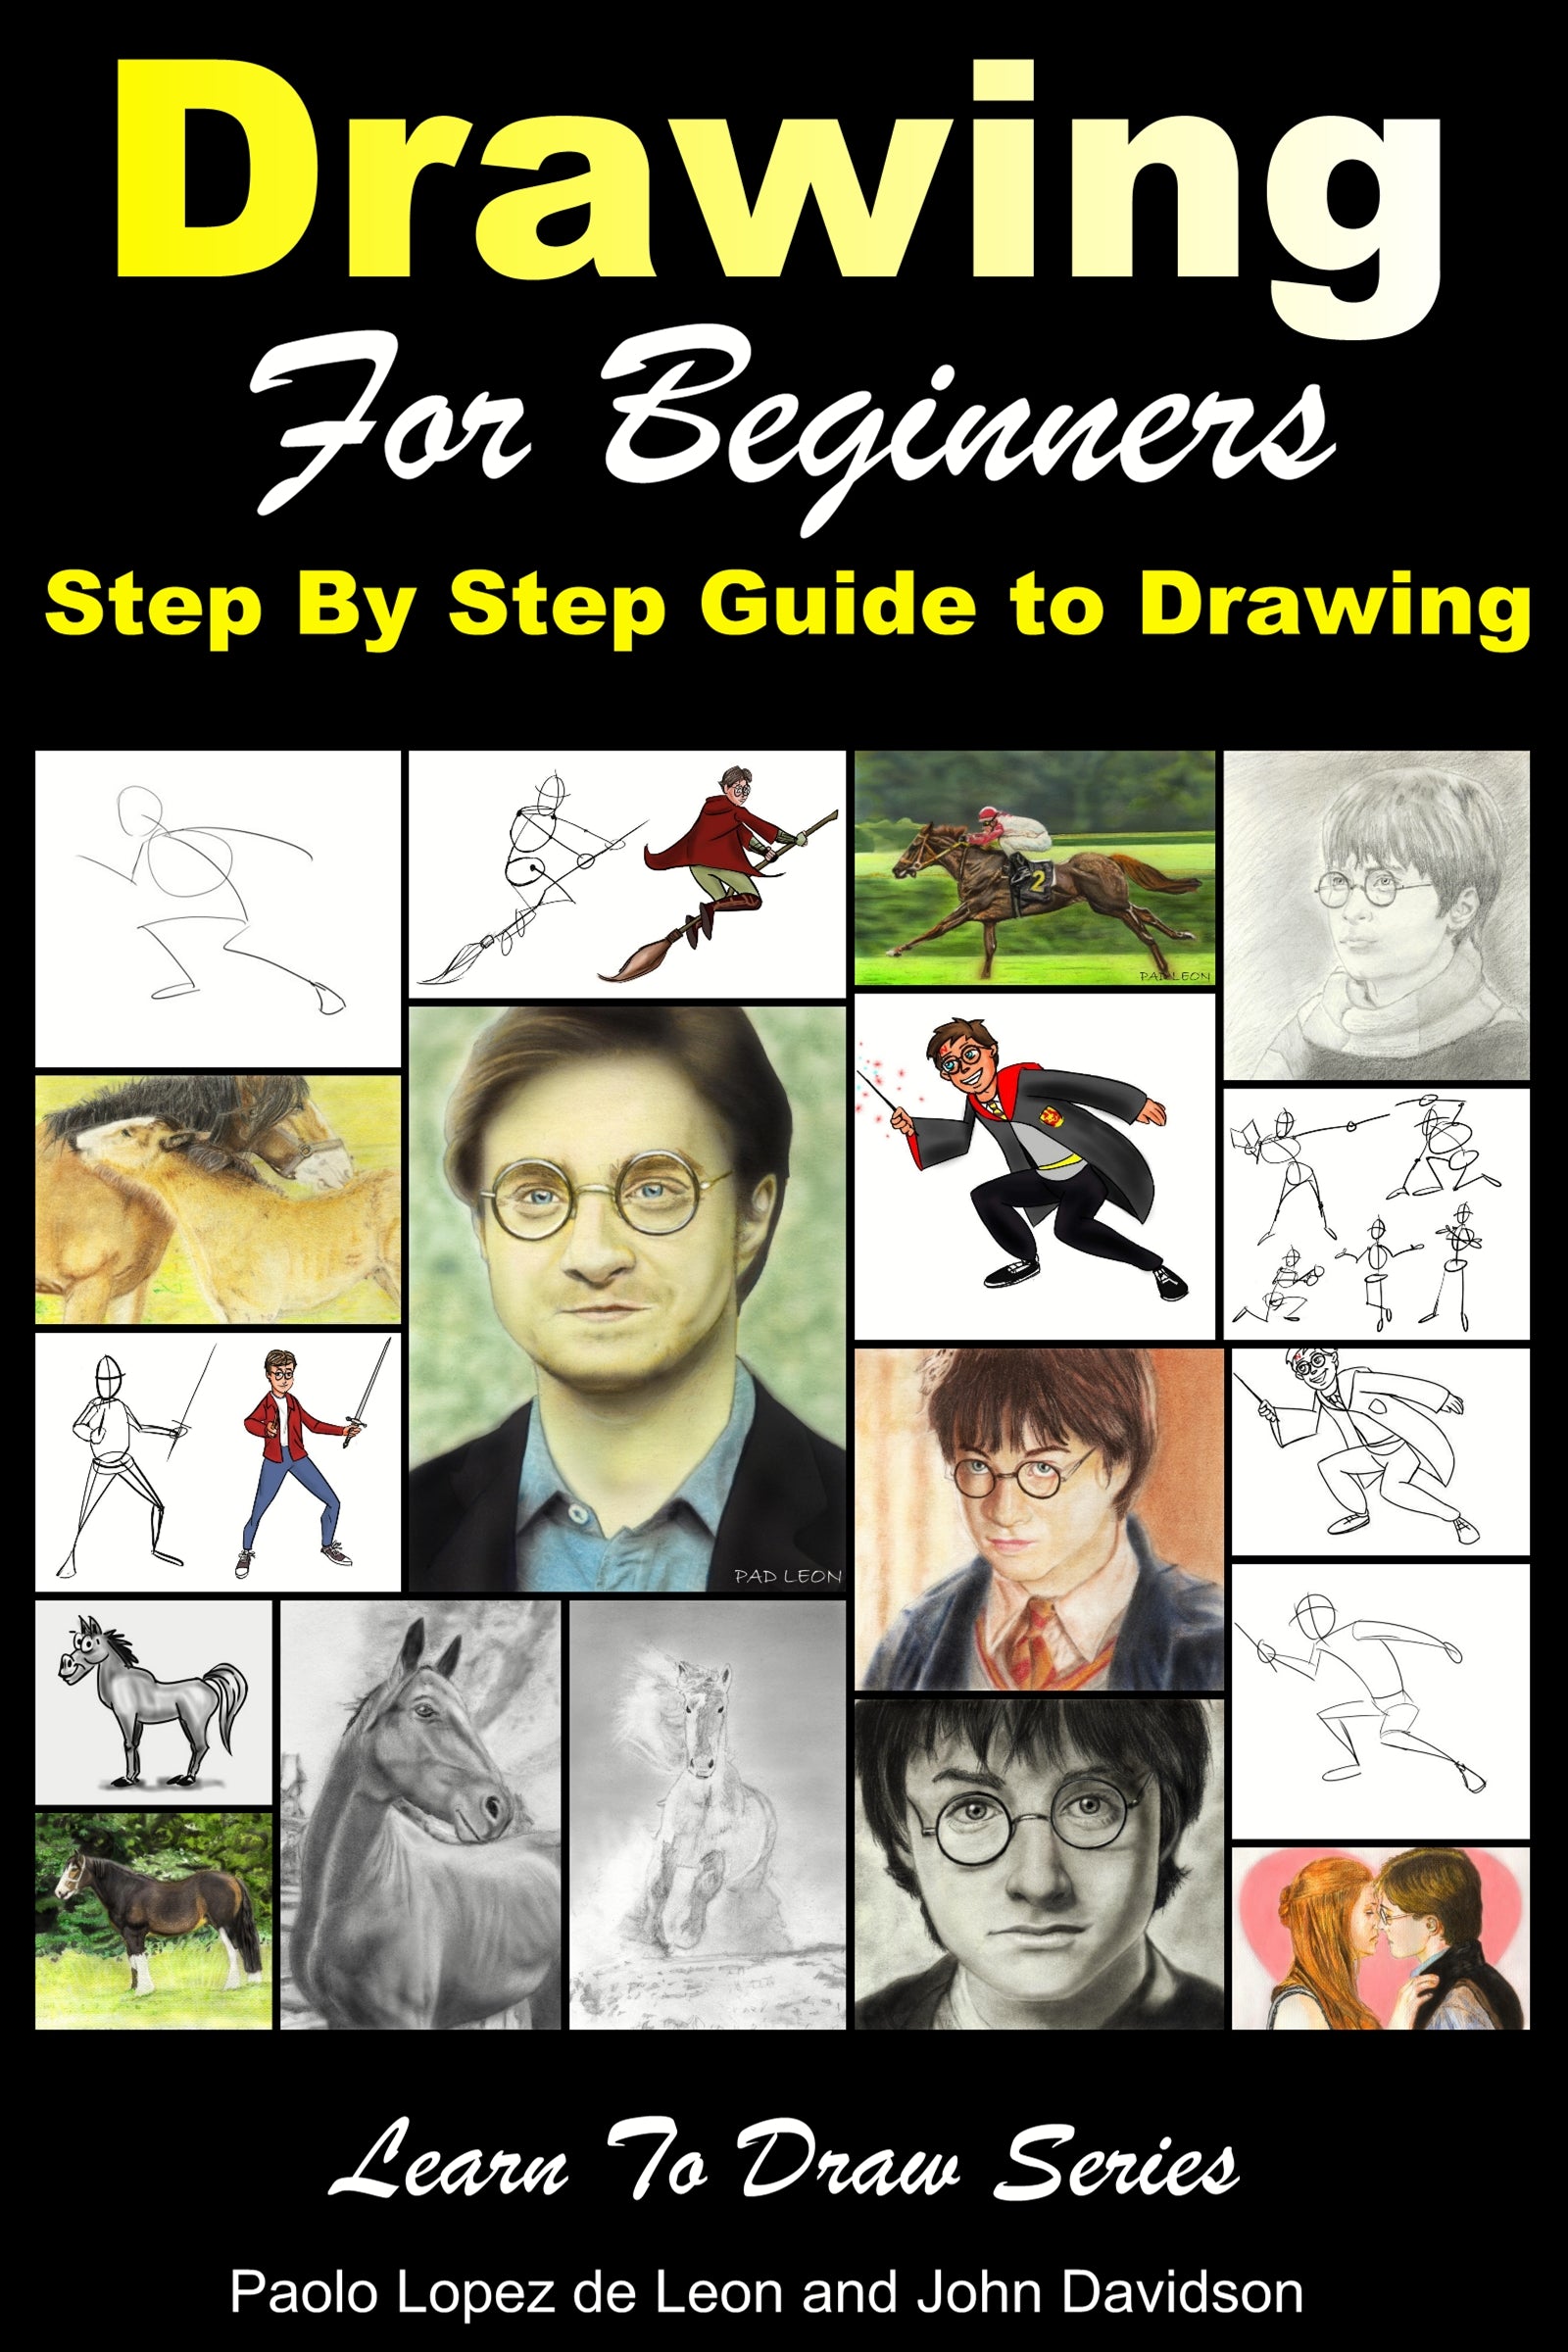 Drawing for Beginners - Step By Step Guide to Drawing – Learn to